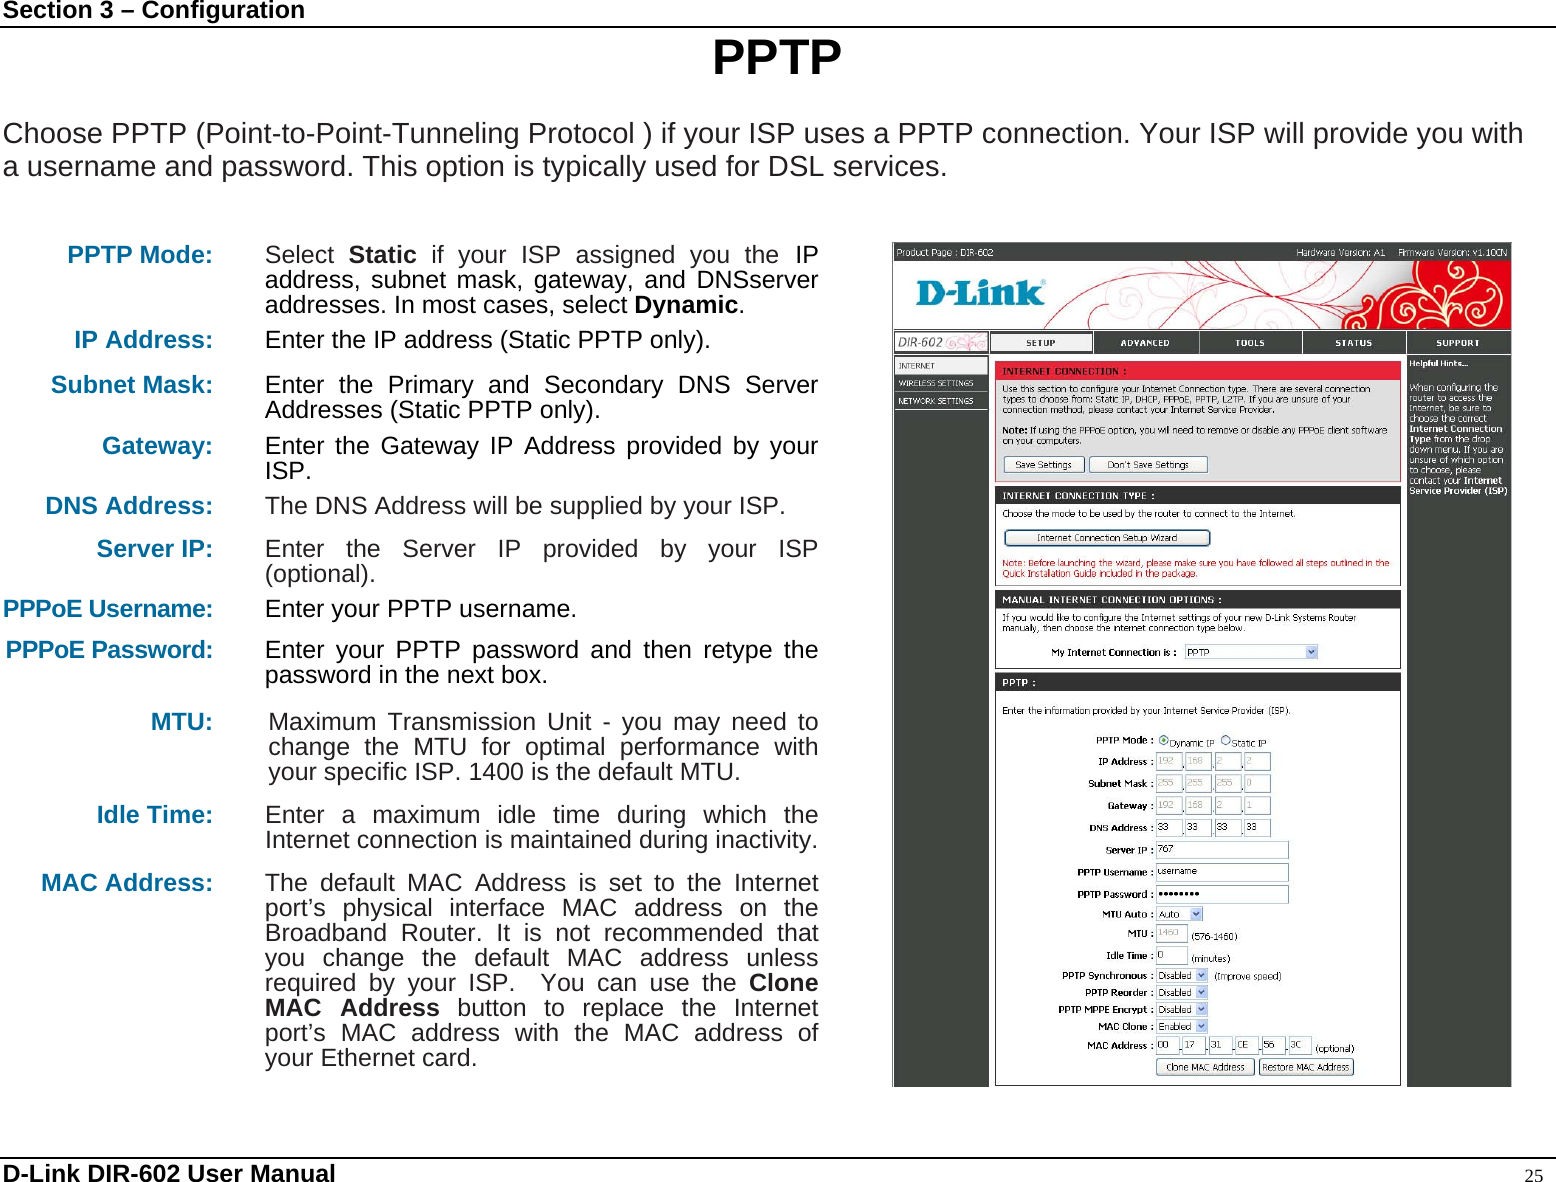 Section 3 – Configuration  PPTP  Choose PPTP (Point-to-Point-Tunneling Protocol ) if your ISP uses a PPTP connection. Your ISP will provide you with a username and password. This option is typically used for DSL services.     PPTP Mode: Select  Static if your ISP assigned you the IP address, subnet mask, gateway, and DNSserver addresses. In most cases, select Dynamic. IP Address: Enter the IP address (Static PPTP only). Subnet Mask: Enter the Primary and Secondary DNS Server Addresses (Static PPTP only). Gateway: Enter the Gateway IP Address provided by your ISP. DNS Address:  The DNS Address will be supplied by your ISP.  Server IP: Enter the Server IP provided by your ISP (optional). PPPoE Username: Enter your PPTP username. PPPoE Password: Enter your PPTP password and then retype the password in the next box. MTU: Maximum Transmission Unit - you may need to change the MTU for optimal performance with your specific ISP. 1400 is the default MTU. Idle Time:  Enter a maximum idle time during which the Internet connection is maintained during inactivity.   MAC Address:  The default MAC Address is set to the Internet port’s physical interface MAC address on the Broadband Router. It is not recommended that you change the default MAC address unless required by your ISP.  You can use the Clone MAC Address button to replace the Internet port’s MAC address with the MAC address of your Ethernet card.   D-Link DIR-602 User Manual                                                                                               25 